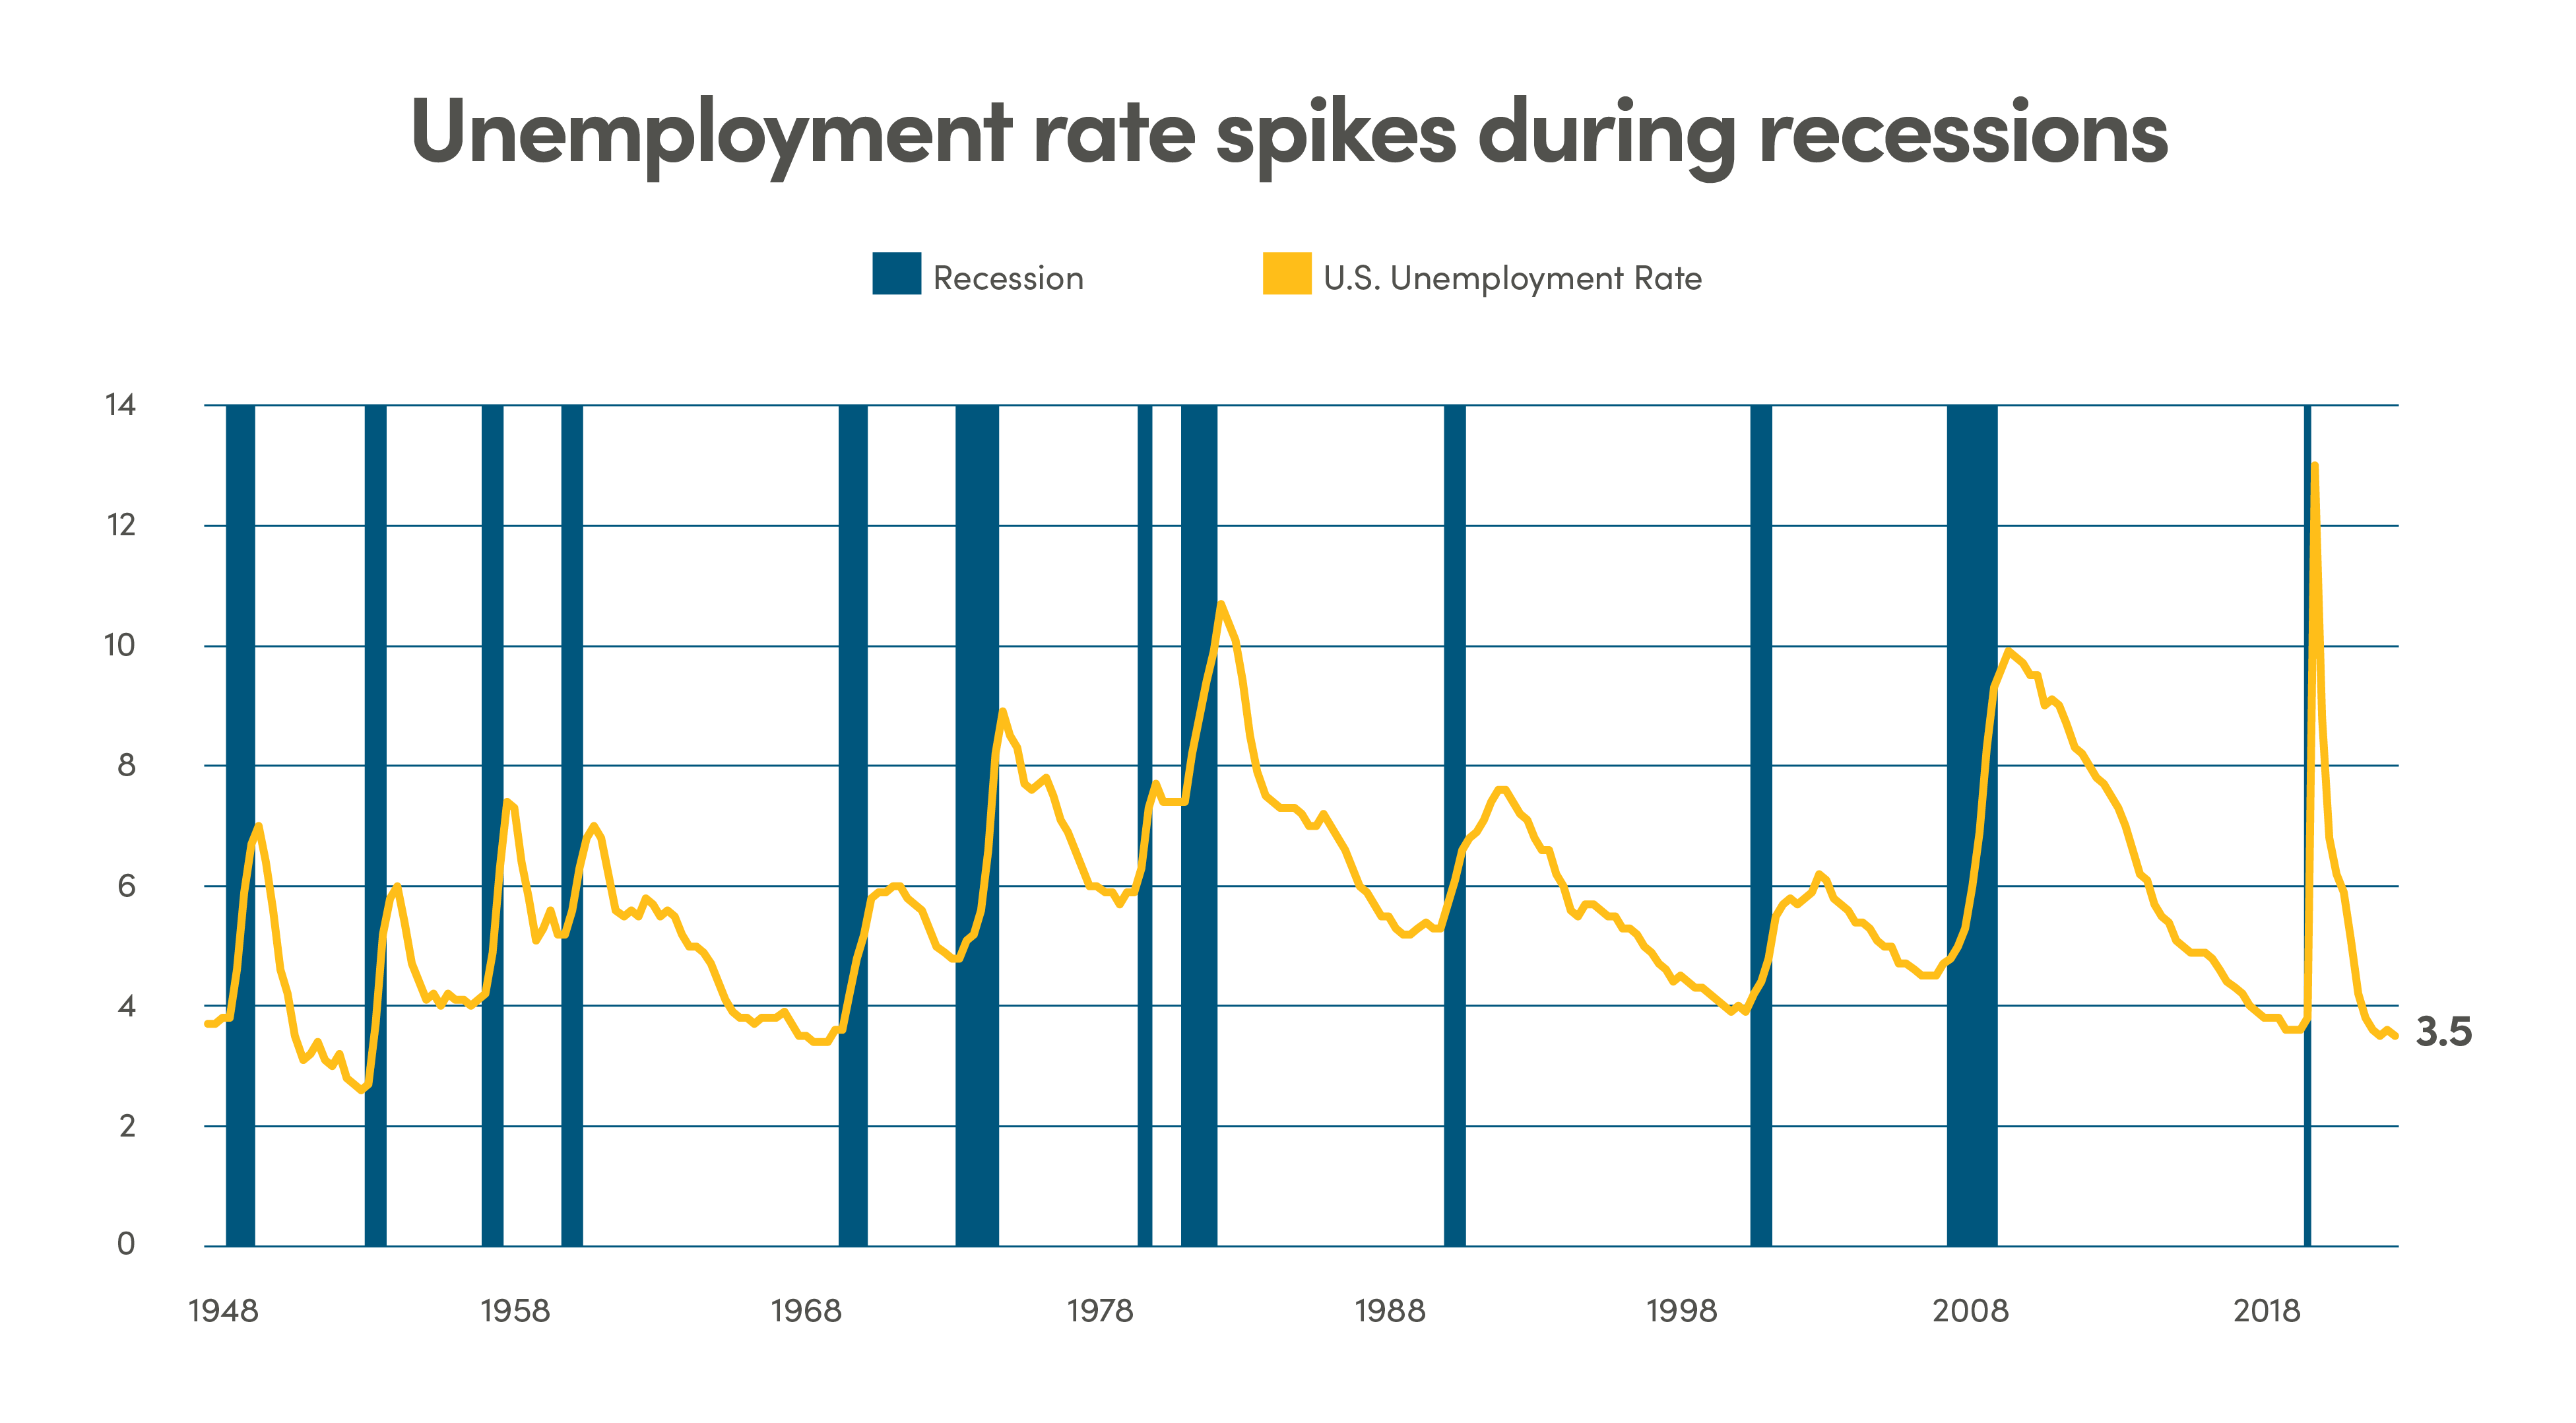 Line graph showing unemployment rate spikes during recessions. Recession dates are shown as blue bars; US unemployment rate is shown as a yellow line. Dates compared from 1948 to 2018